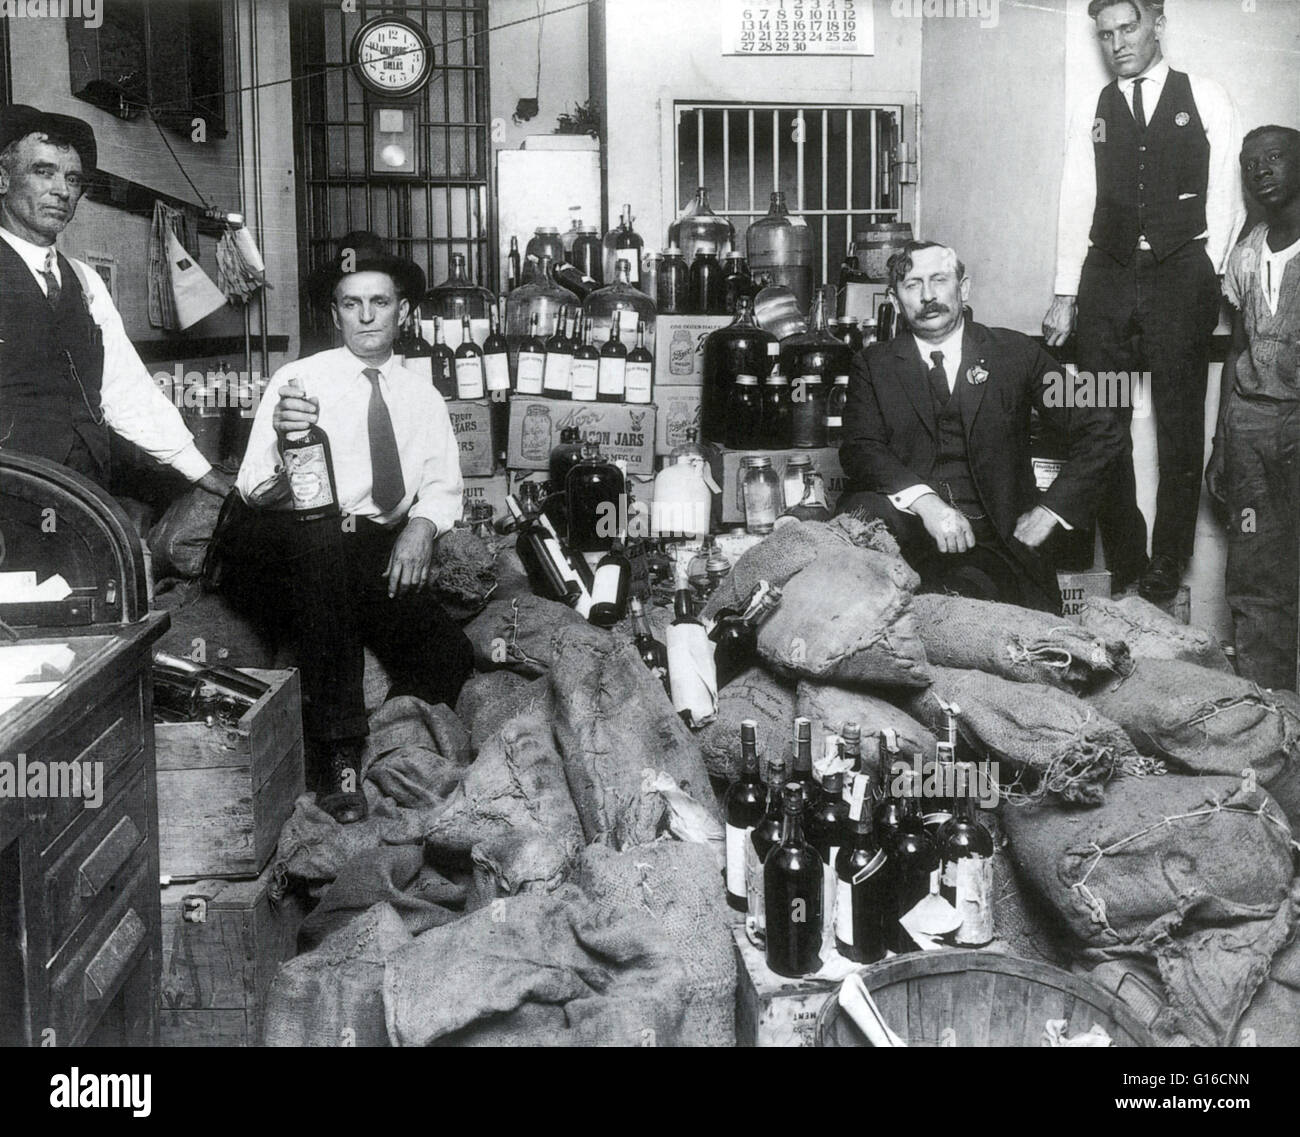 Prohibition in the United States was a nationwide Constitutional ban on the sale, production, importation, and transportation of alcoholic beverages that remained in place from 1920 to 1933. It was promoted by dry crusaders movement, led by rural Protesta Stock Photo